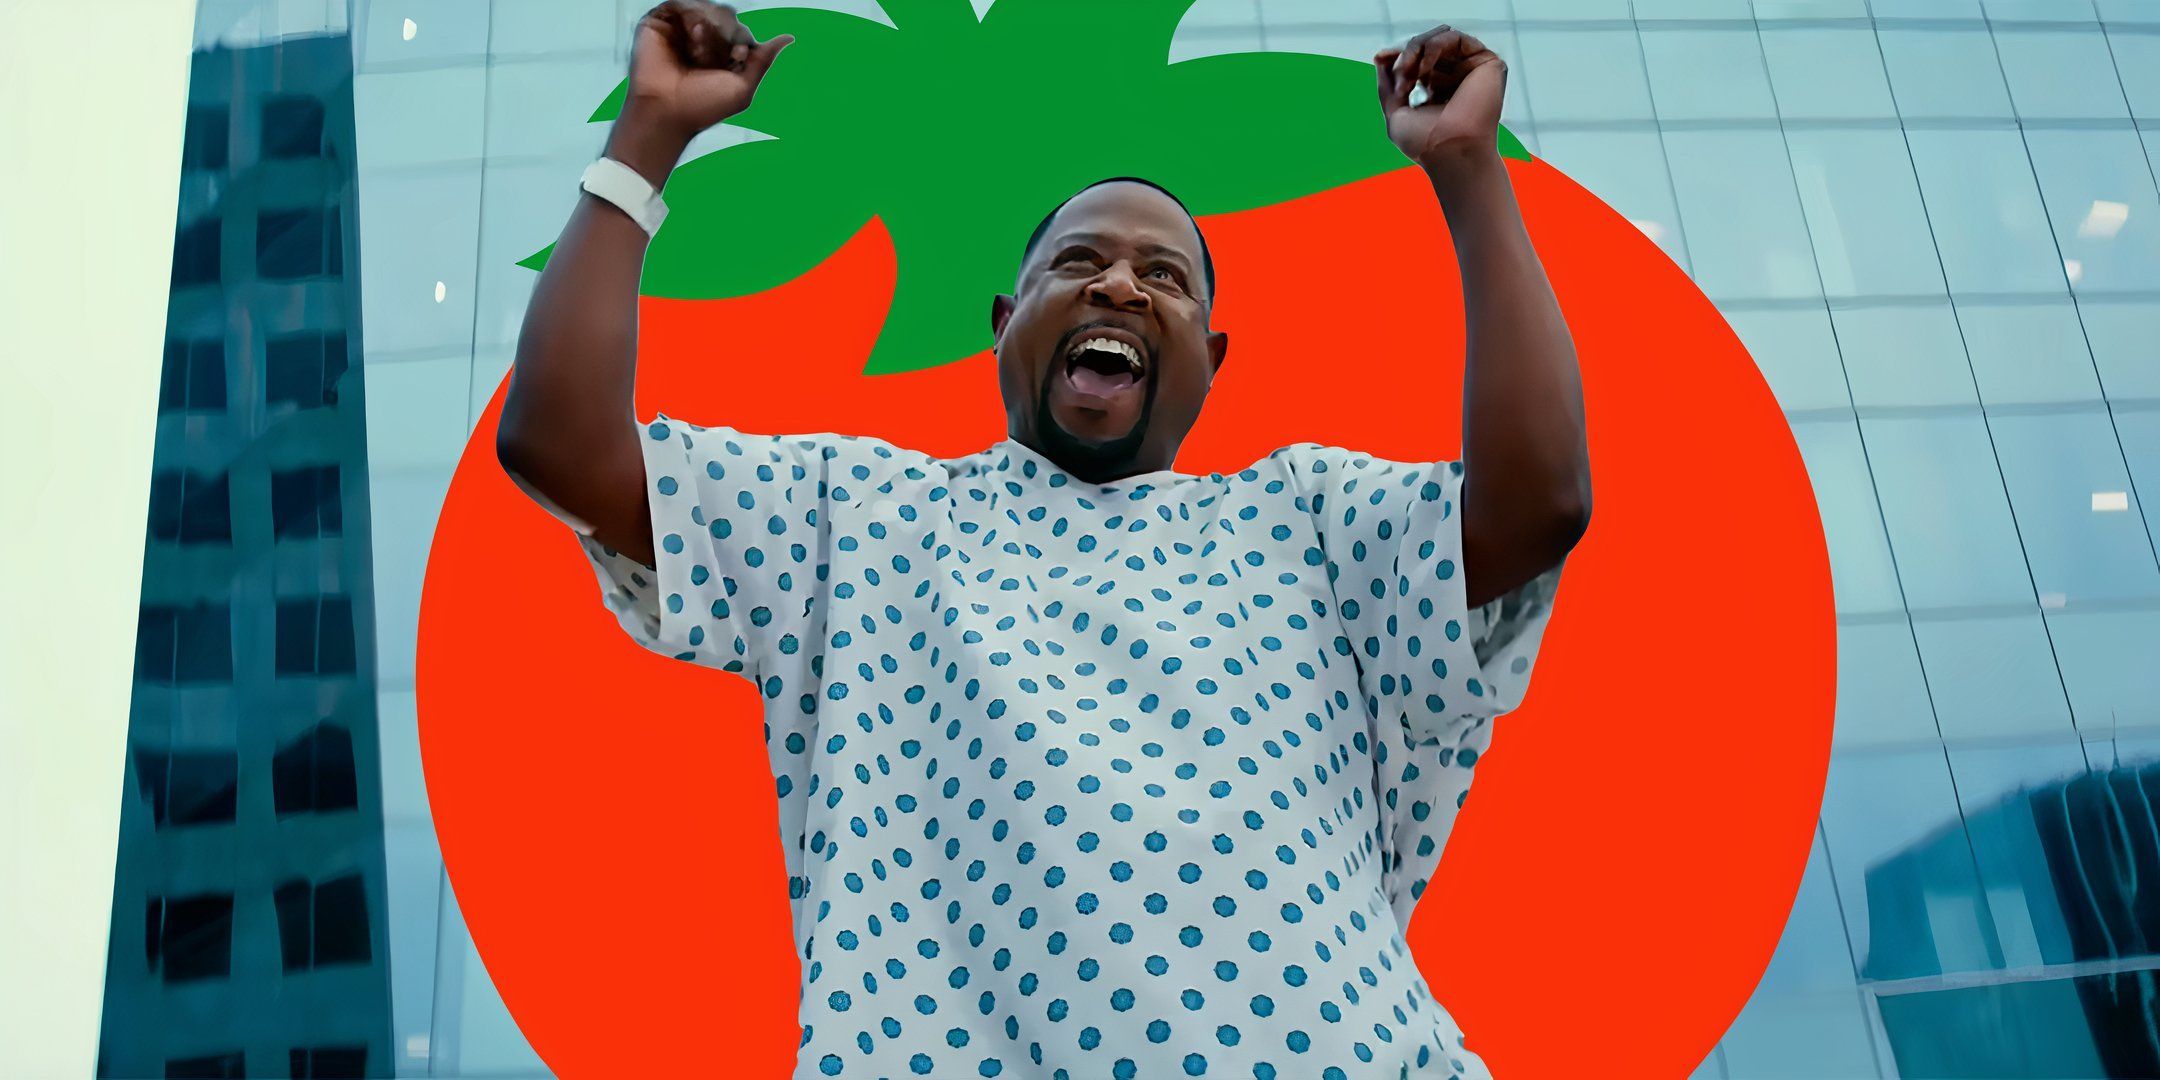 Martin Lawrence as Marcus dancing and smiling in Bad Boys Ride or Die with Rotten Tomatoees Fresh logo in the background